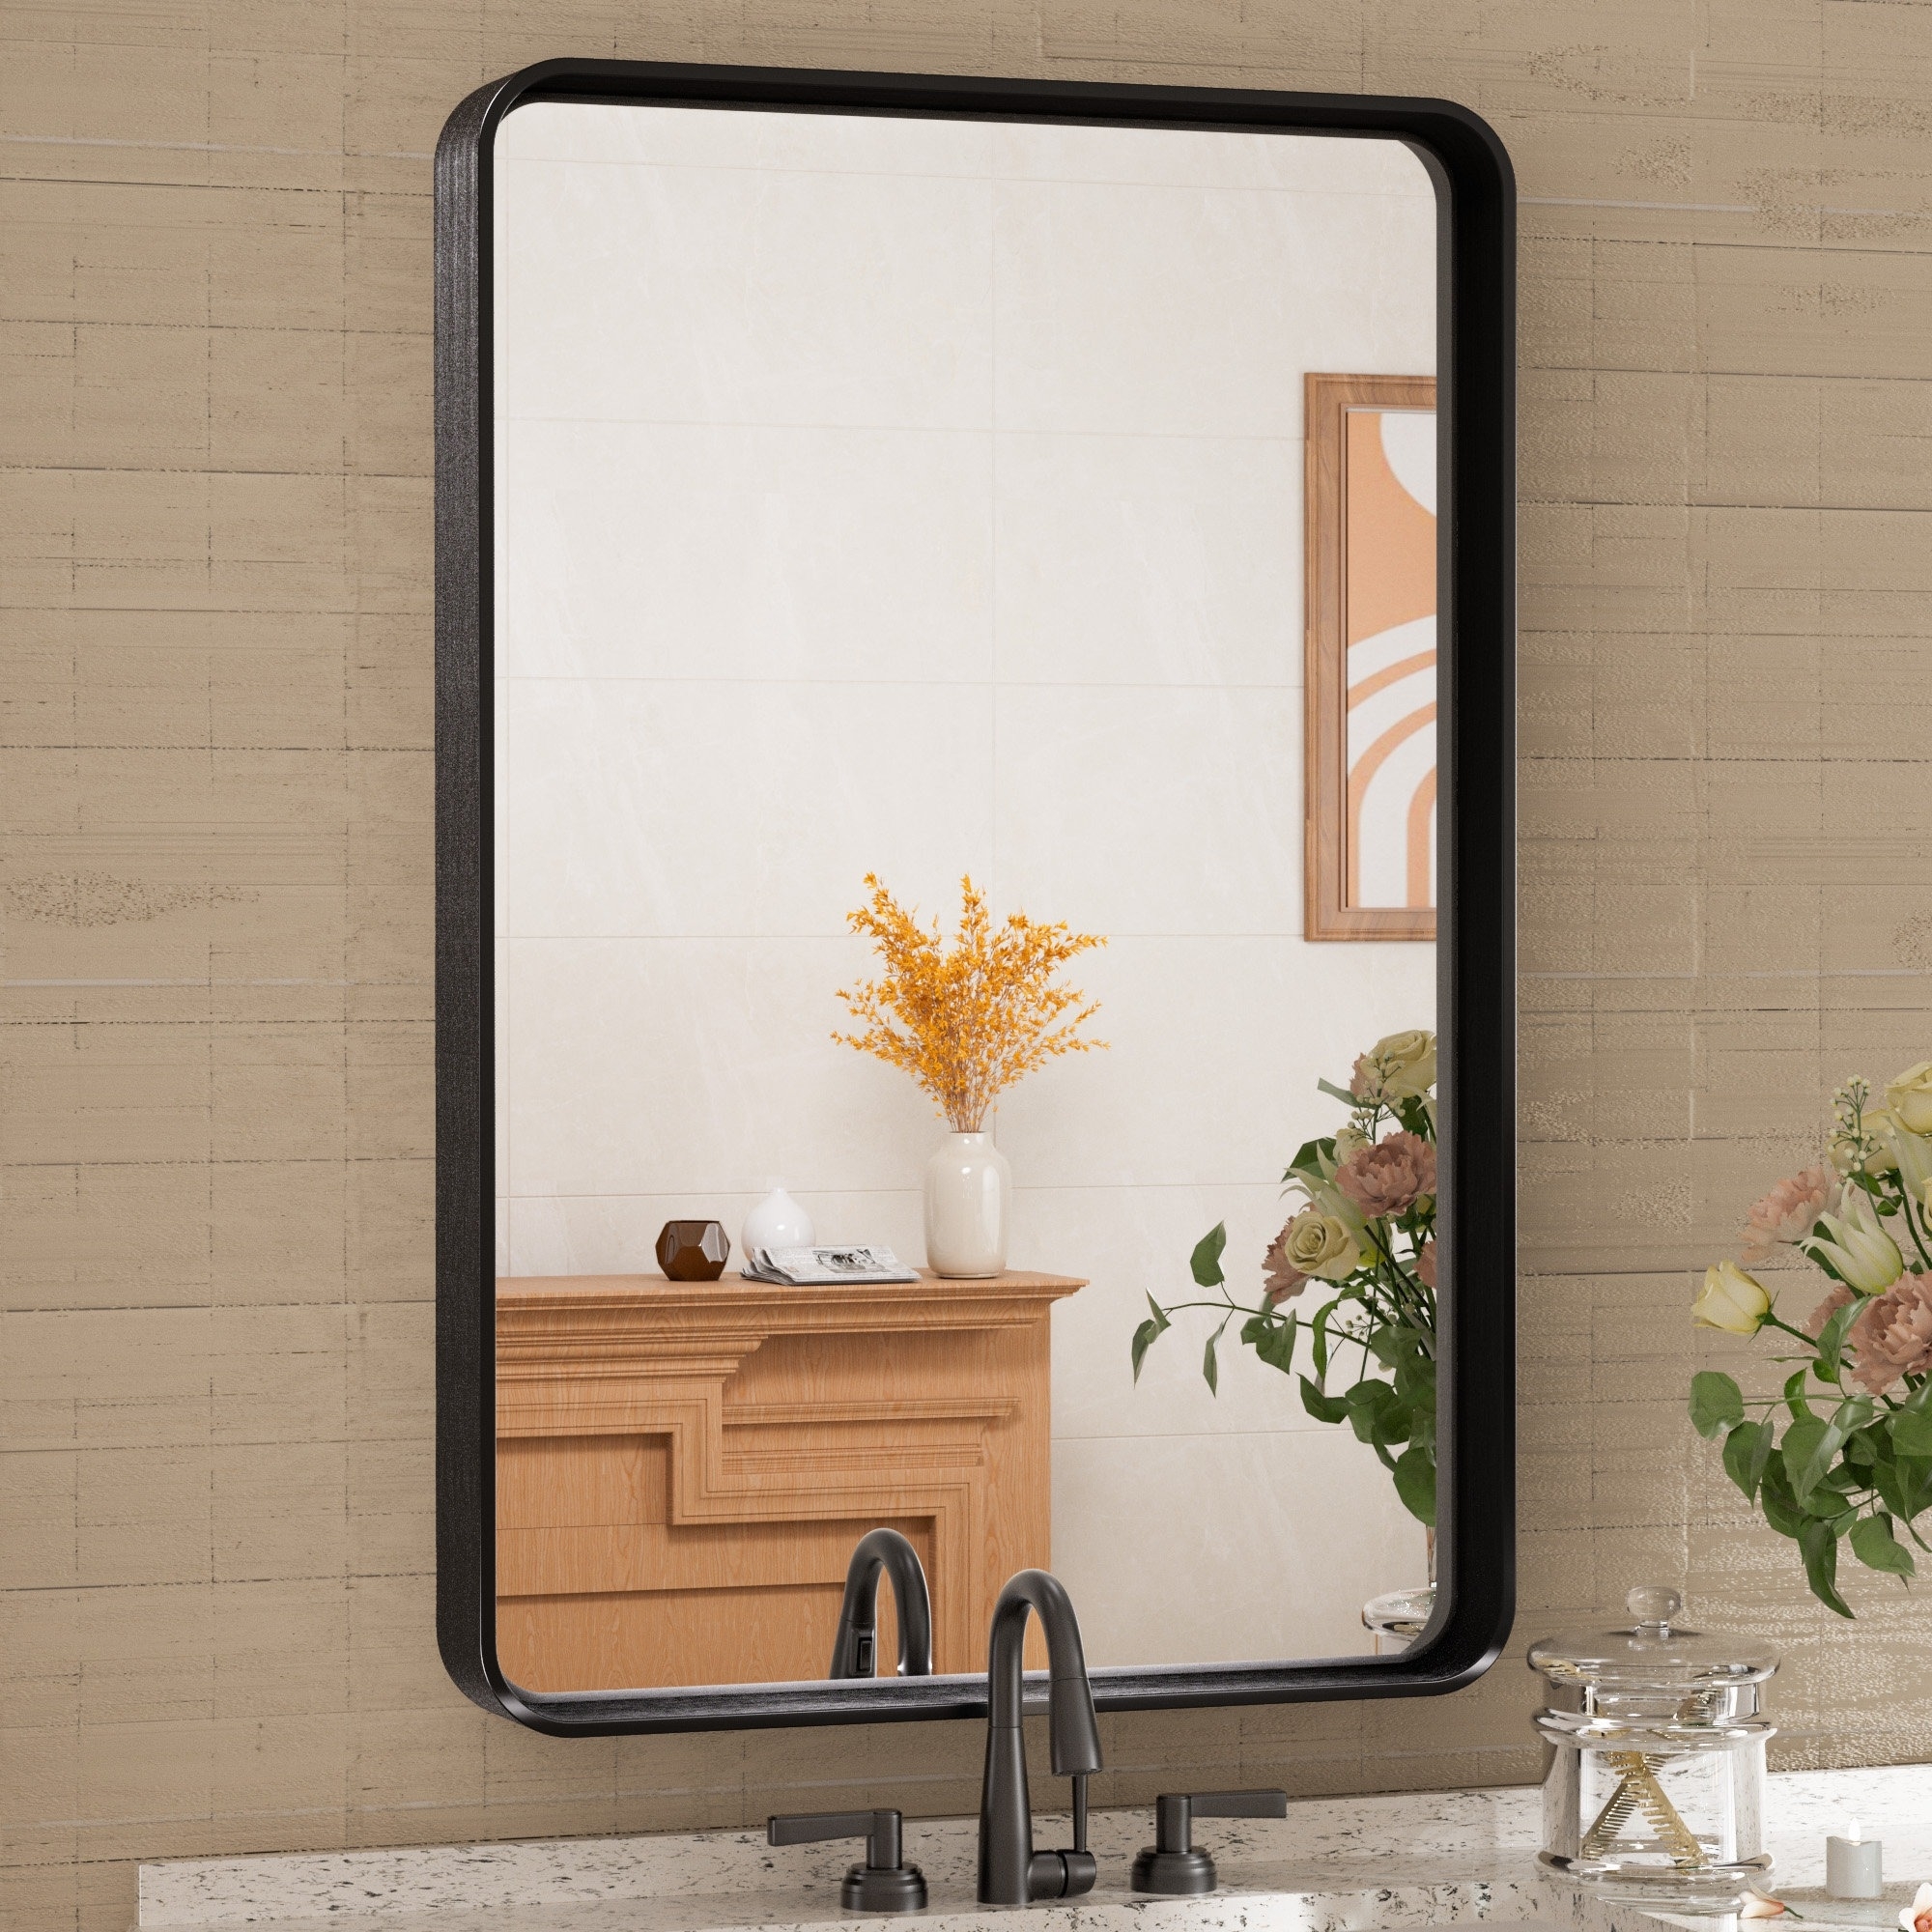 Wall mirror reflecting a bathroom vanity with a vase of yellow flowers and bathroom accessories